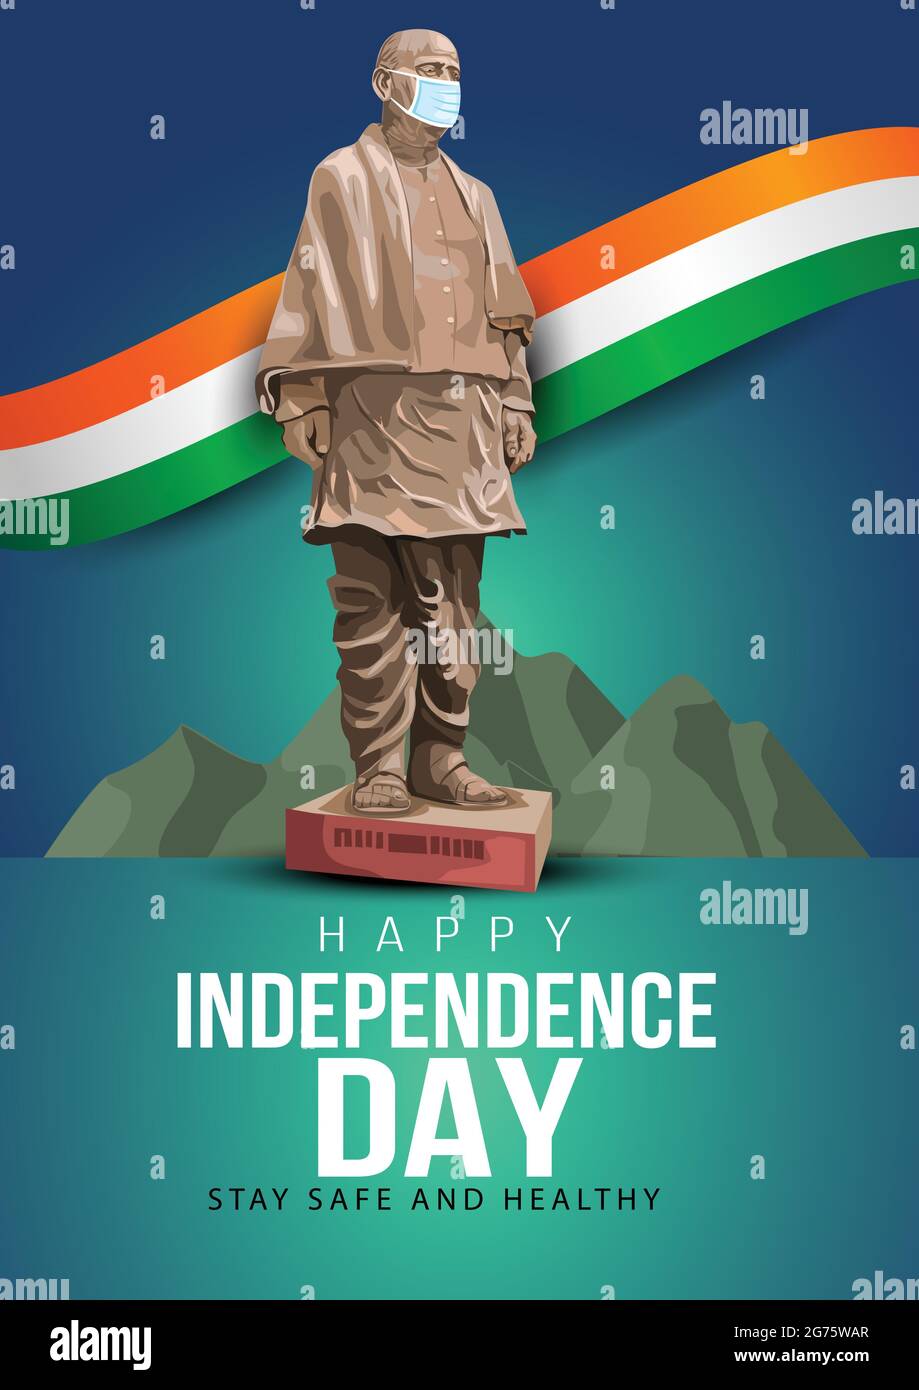 India Independence Day 15 August Celebration Card, poster, Badges Vector Template. covid-19, corona virus concept wit statue of unity Stock Vector